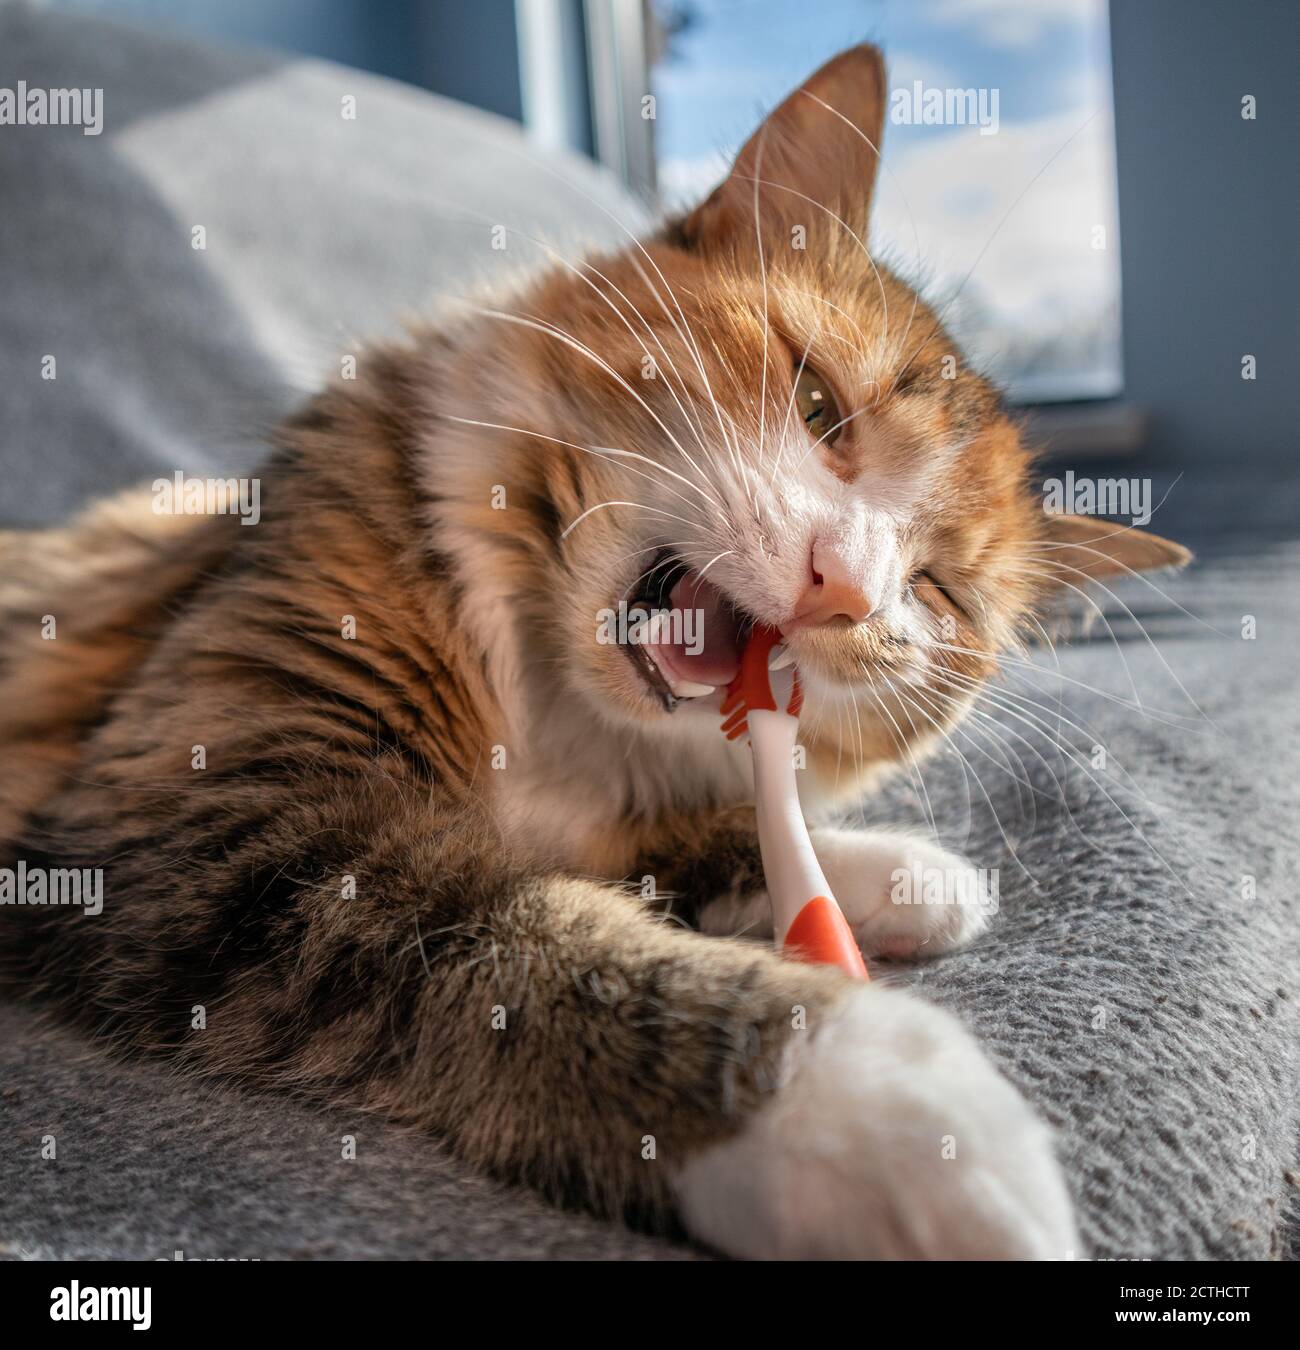 Cat chewing on toothbrush. Pets dental health month in February. Cat with tooth brush in mouth. Cats teeth are visible including fangs. Stock Photo